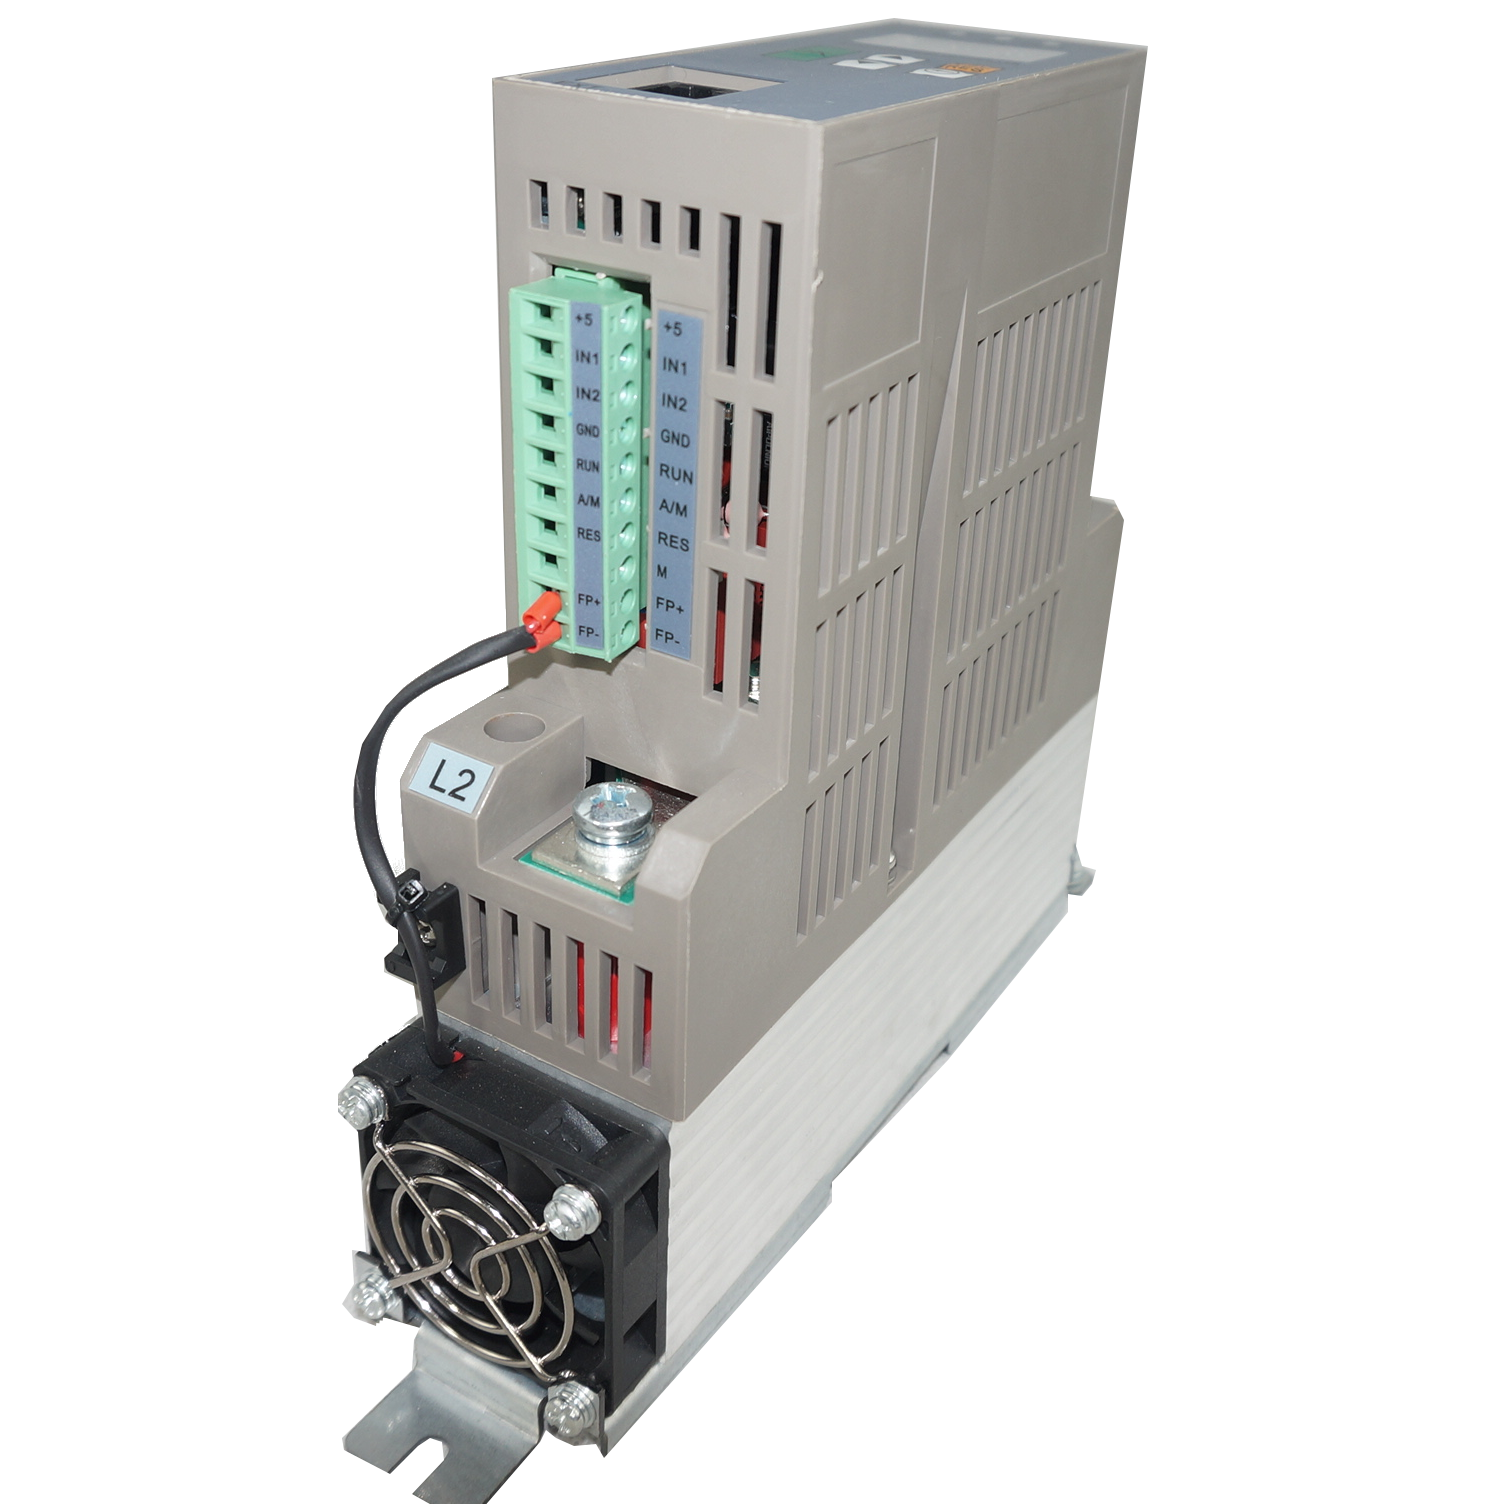 FTM1-A40-V4-W0, Single Phase, Phase Angle/Burst Controller for Primary Control of Transformer (Phase Angle mode only), Voltage/Current/Power Limit Modes, For Single Phase Loads, 400VAC, 32 Amps @ 50 Deg C